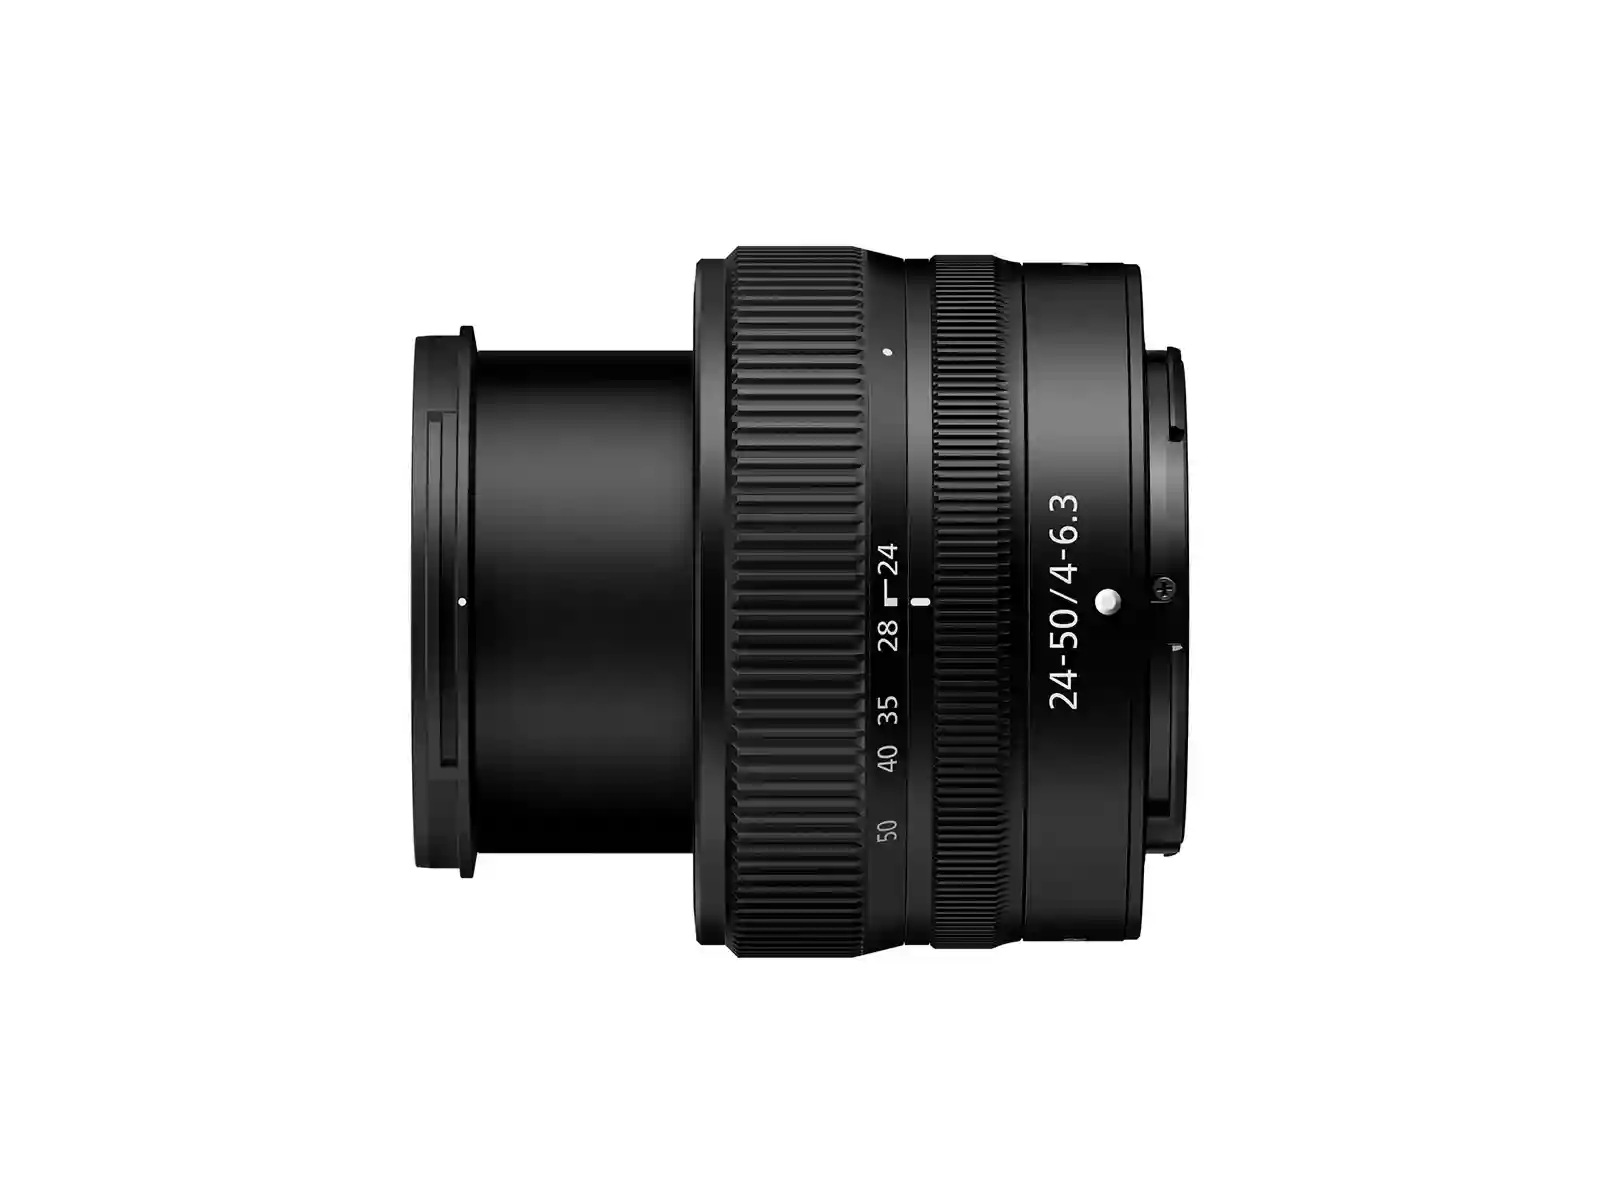 Showing lens extension for Nikon 24-50mm